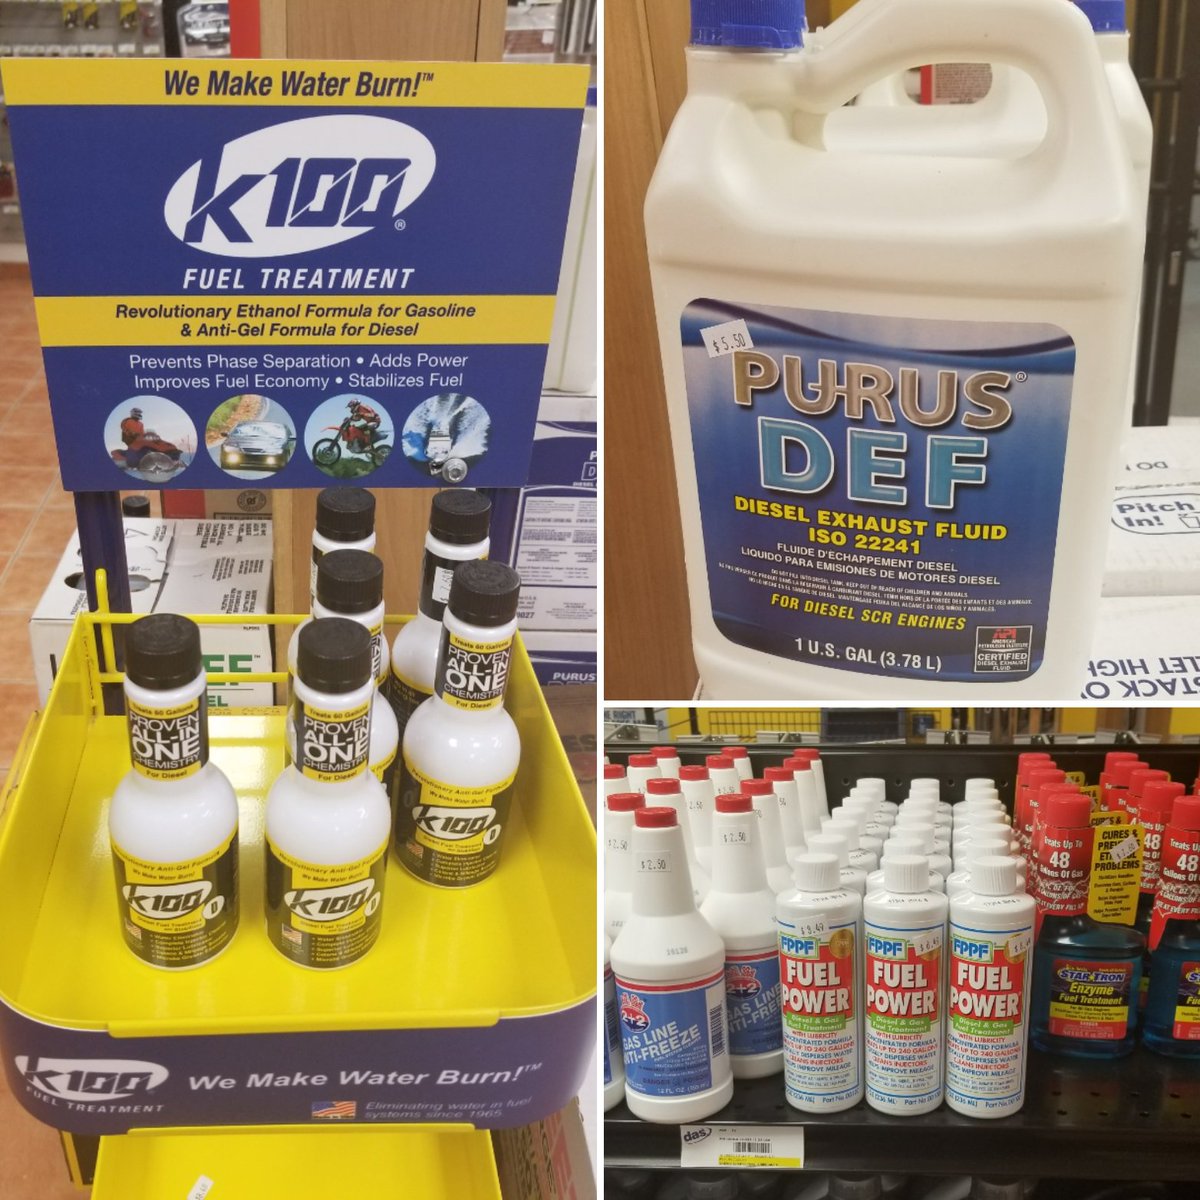 We've got the good stuff for your Diesel and Gas powered engines! Keep things running good while you are on the road and stop in and check out our different products! 
#fueltreatment #diesel #def #gas